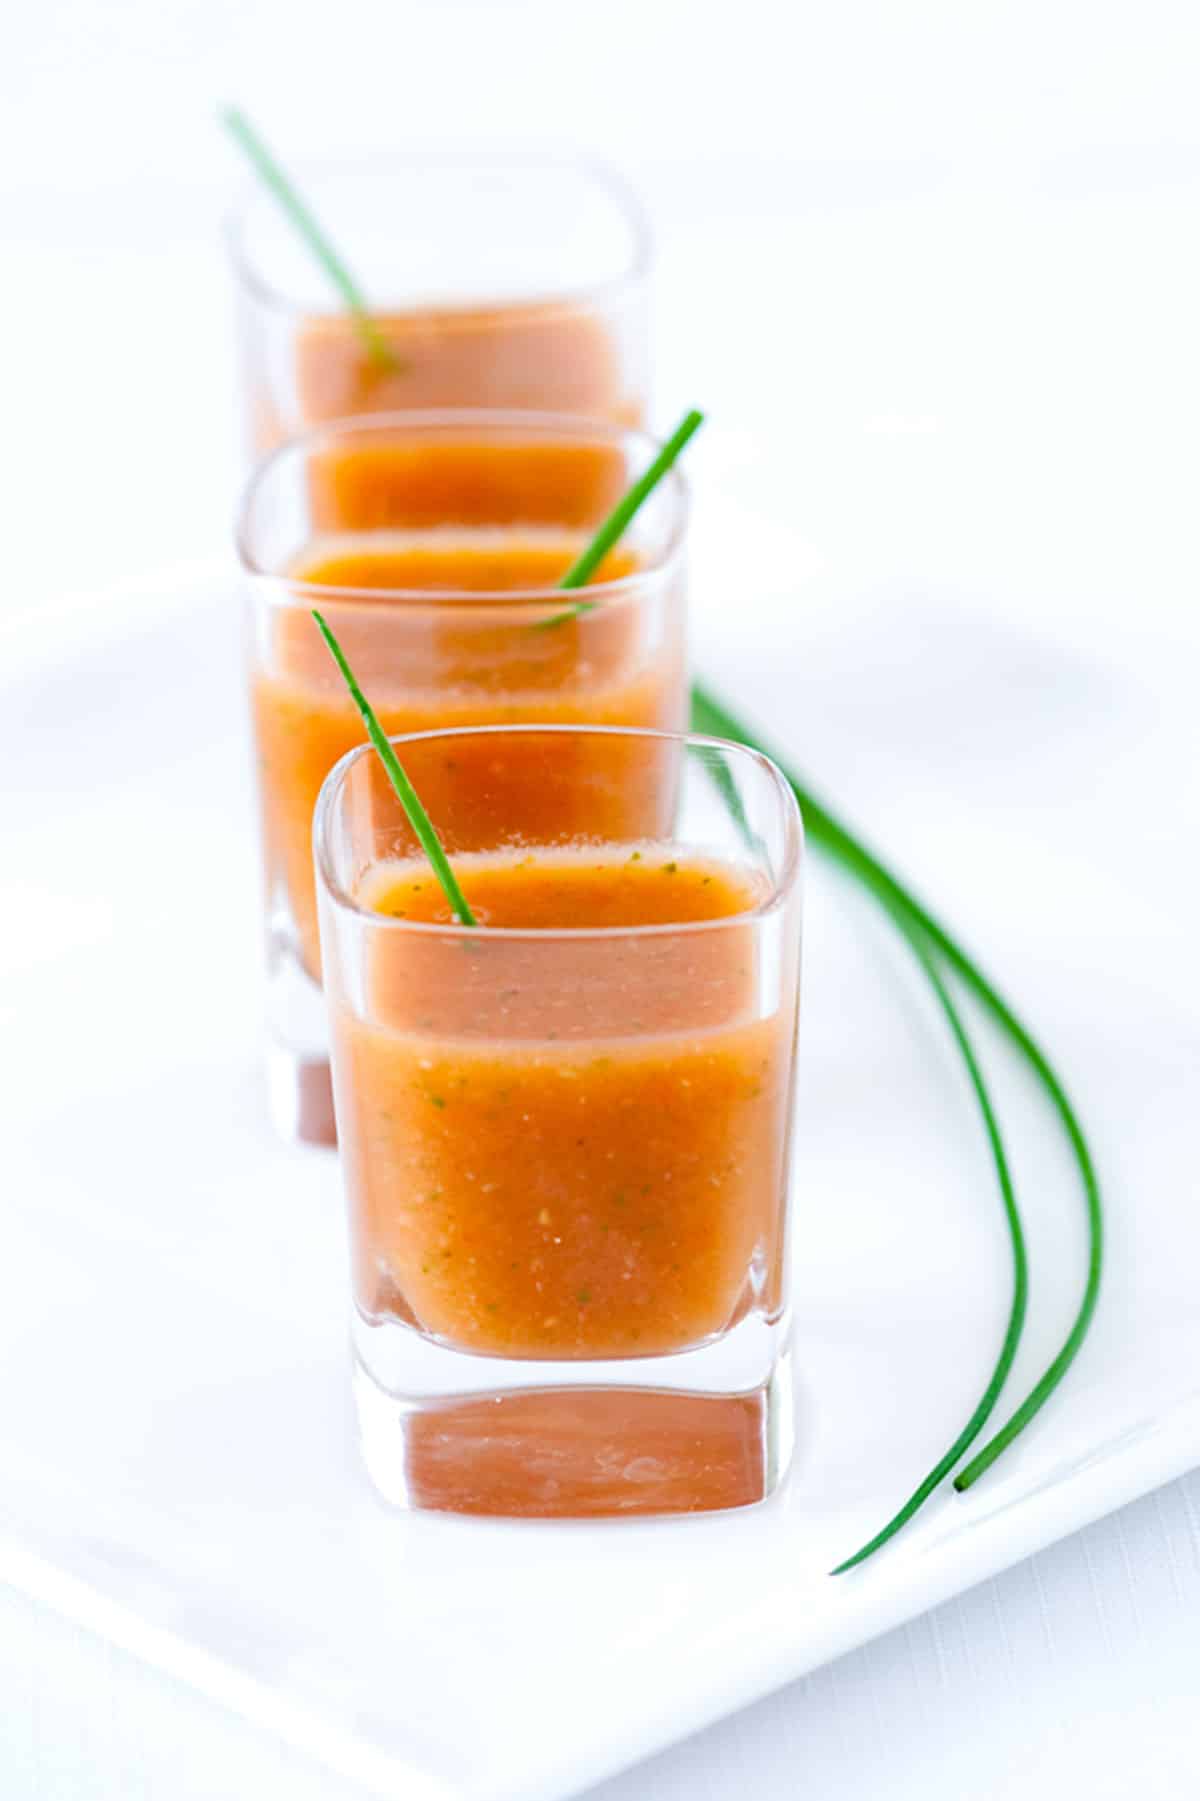 How To Make Gazpacho aka Really Delicious Chilled Tomato Soup